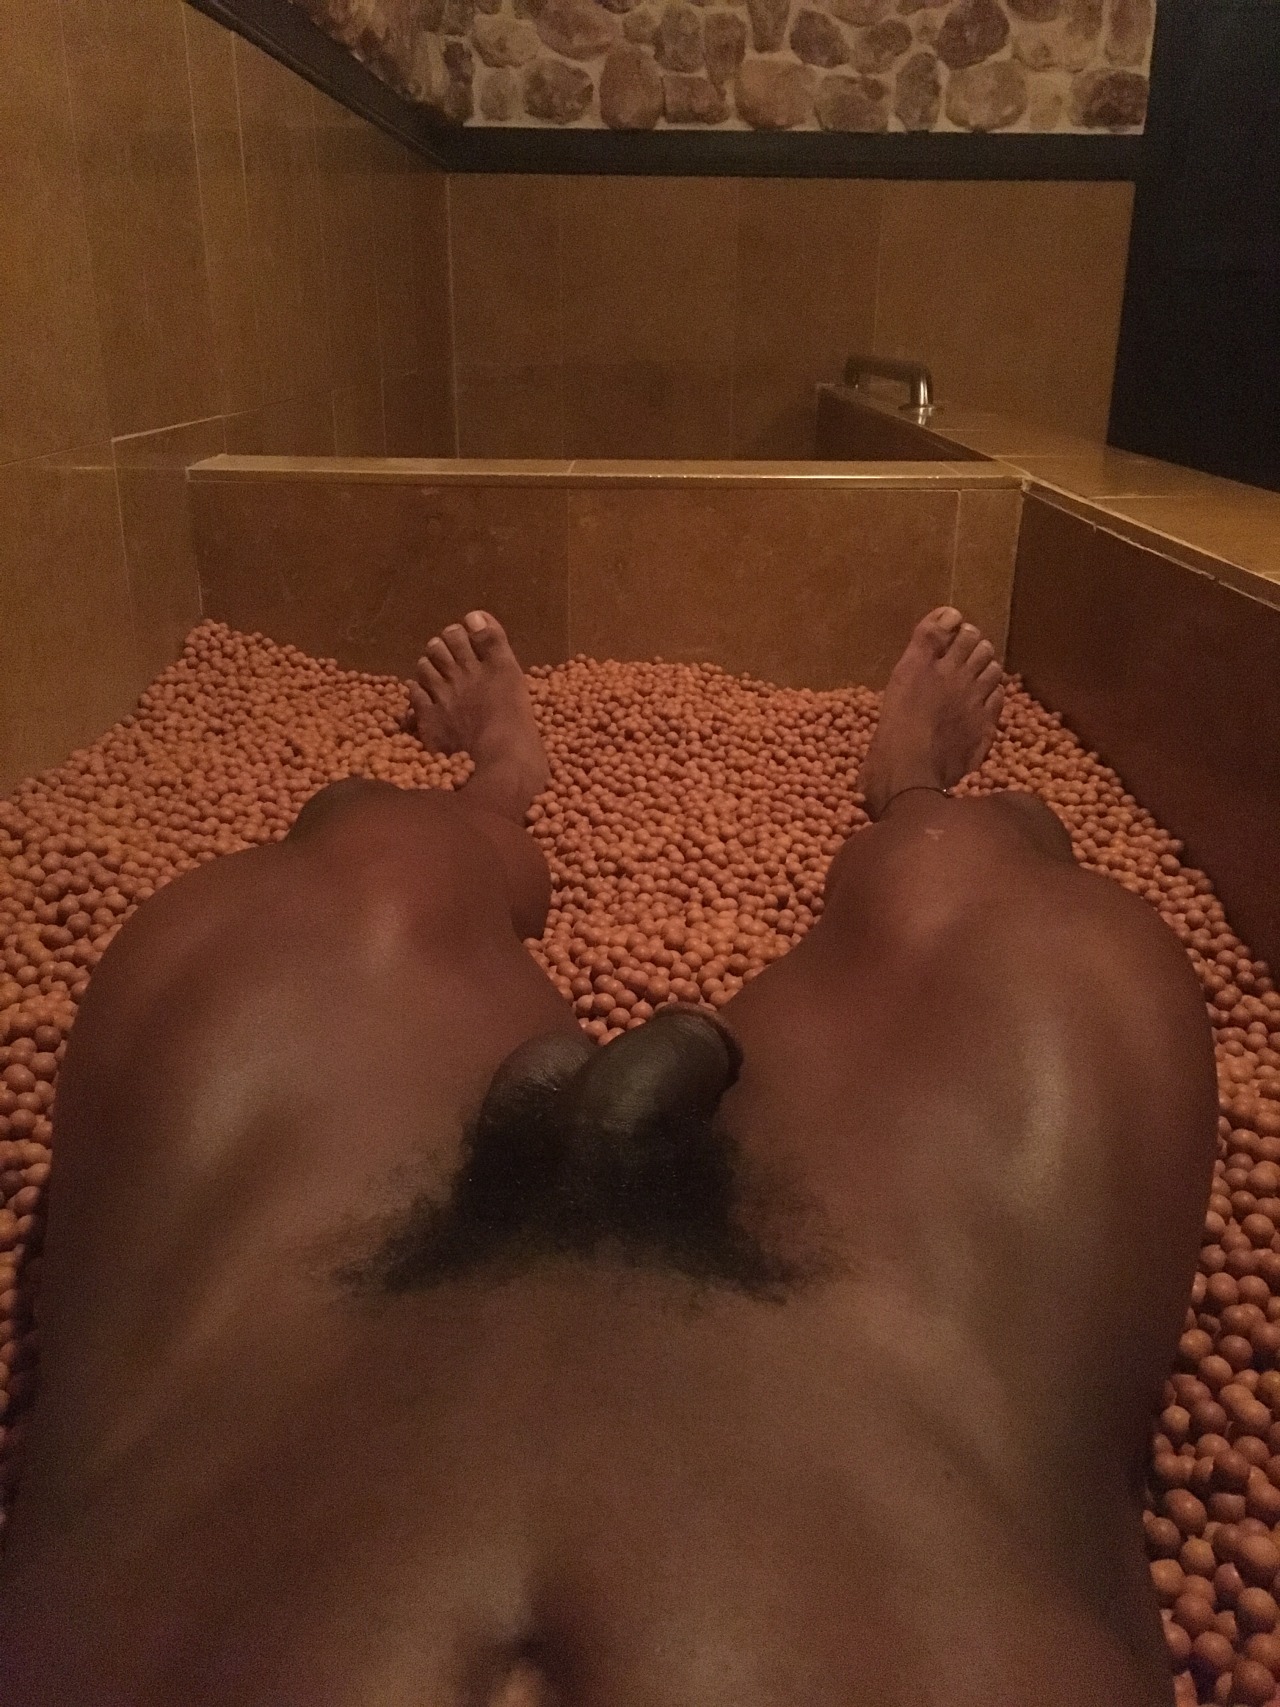 actionfigurebody:  Very relaxing day at the spa 😌👌🏾